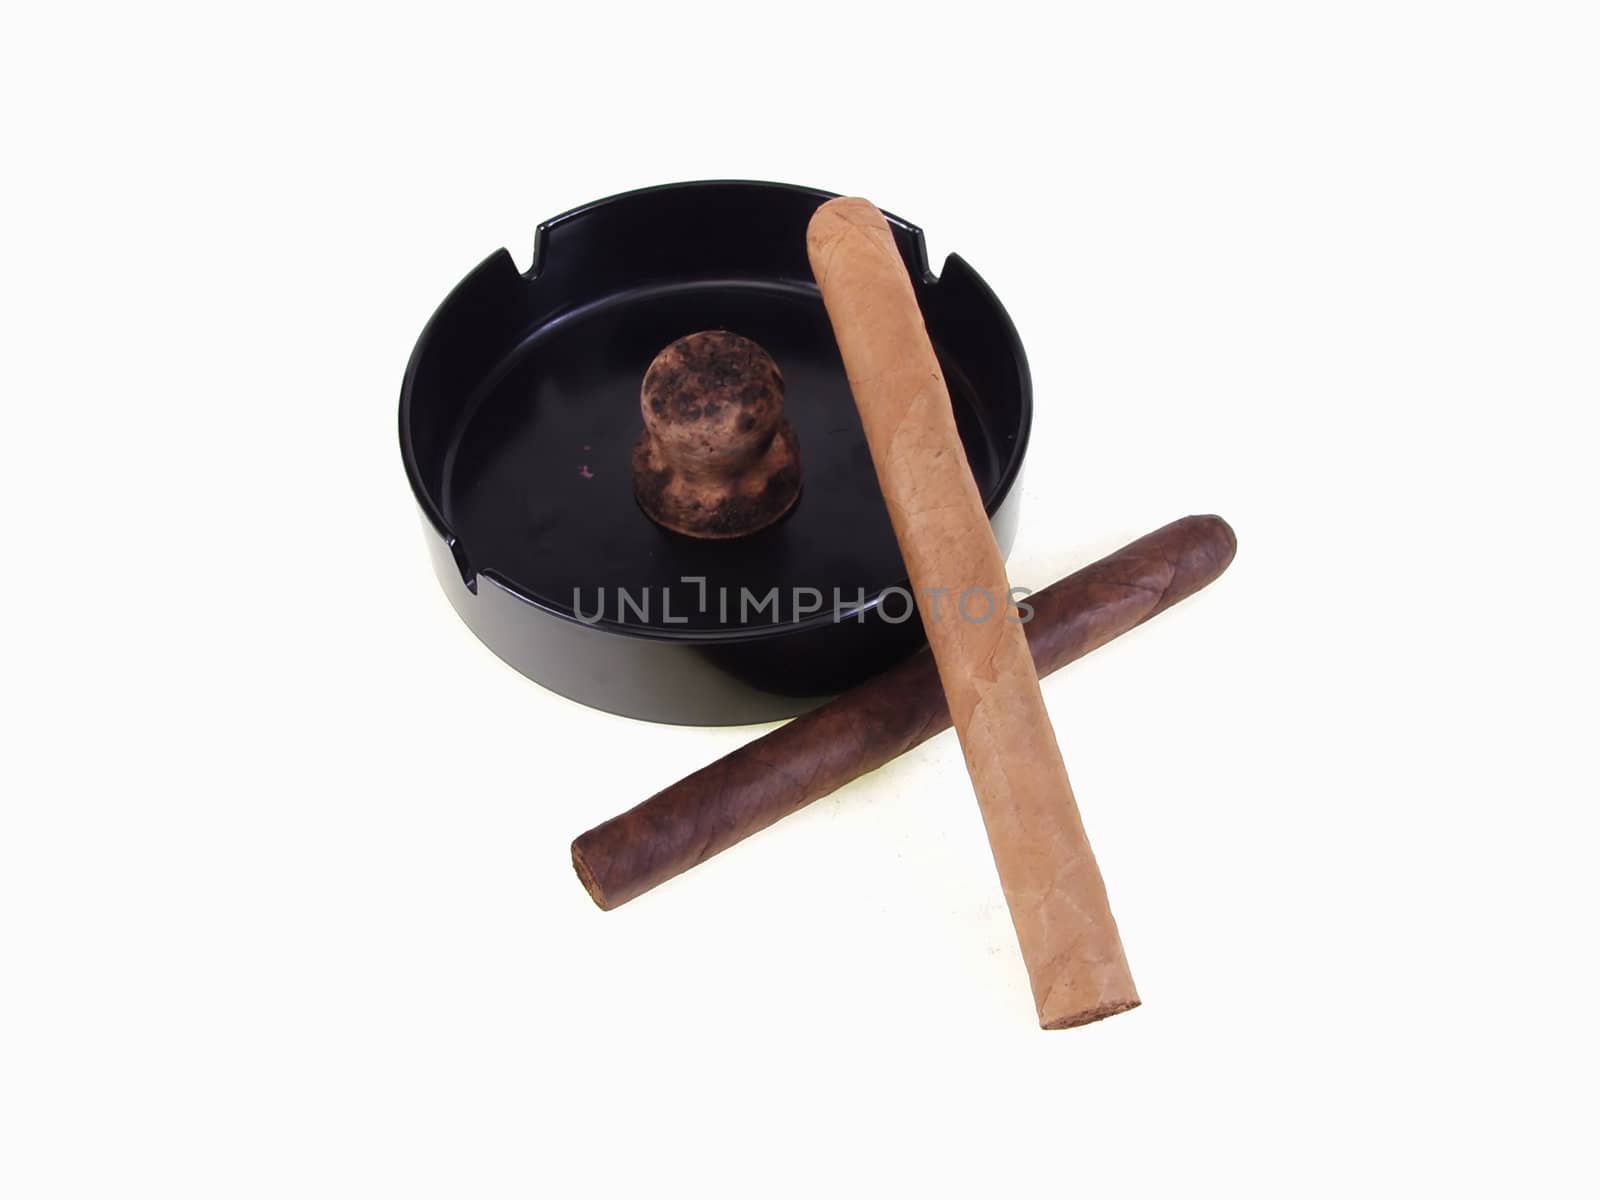 Two unlit cigars with a clean ashtray over a white background with room for text